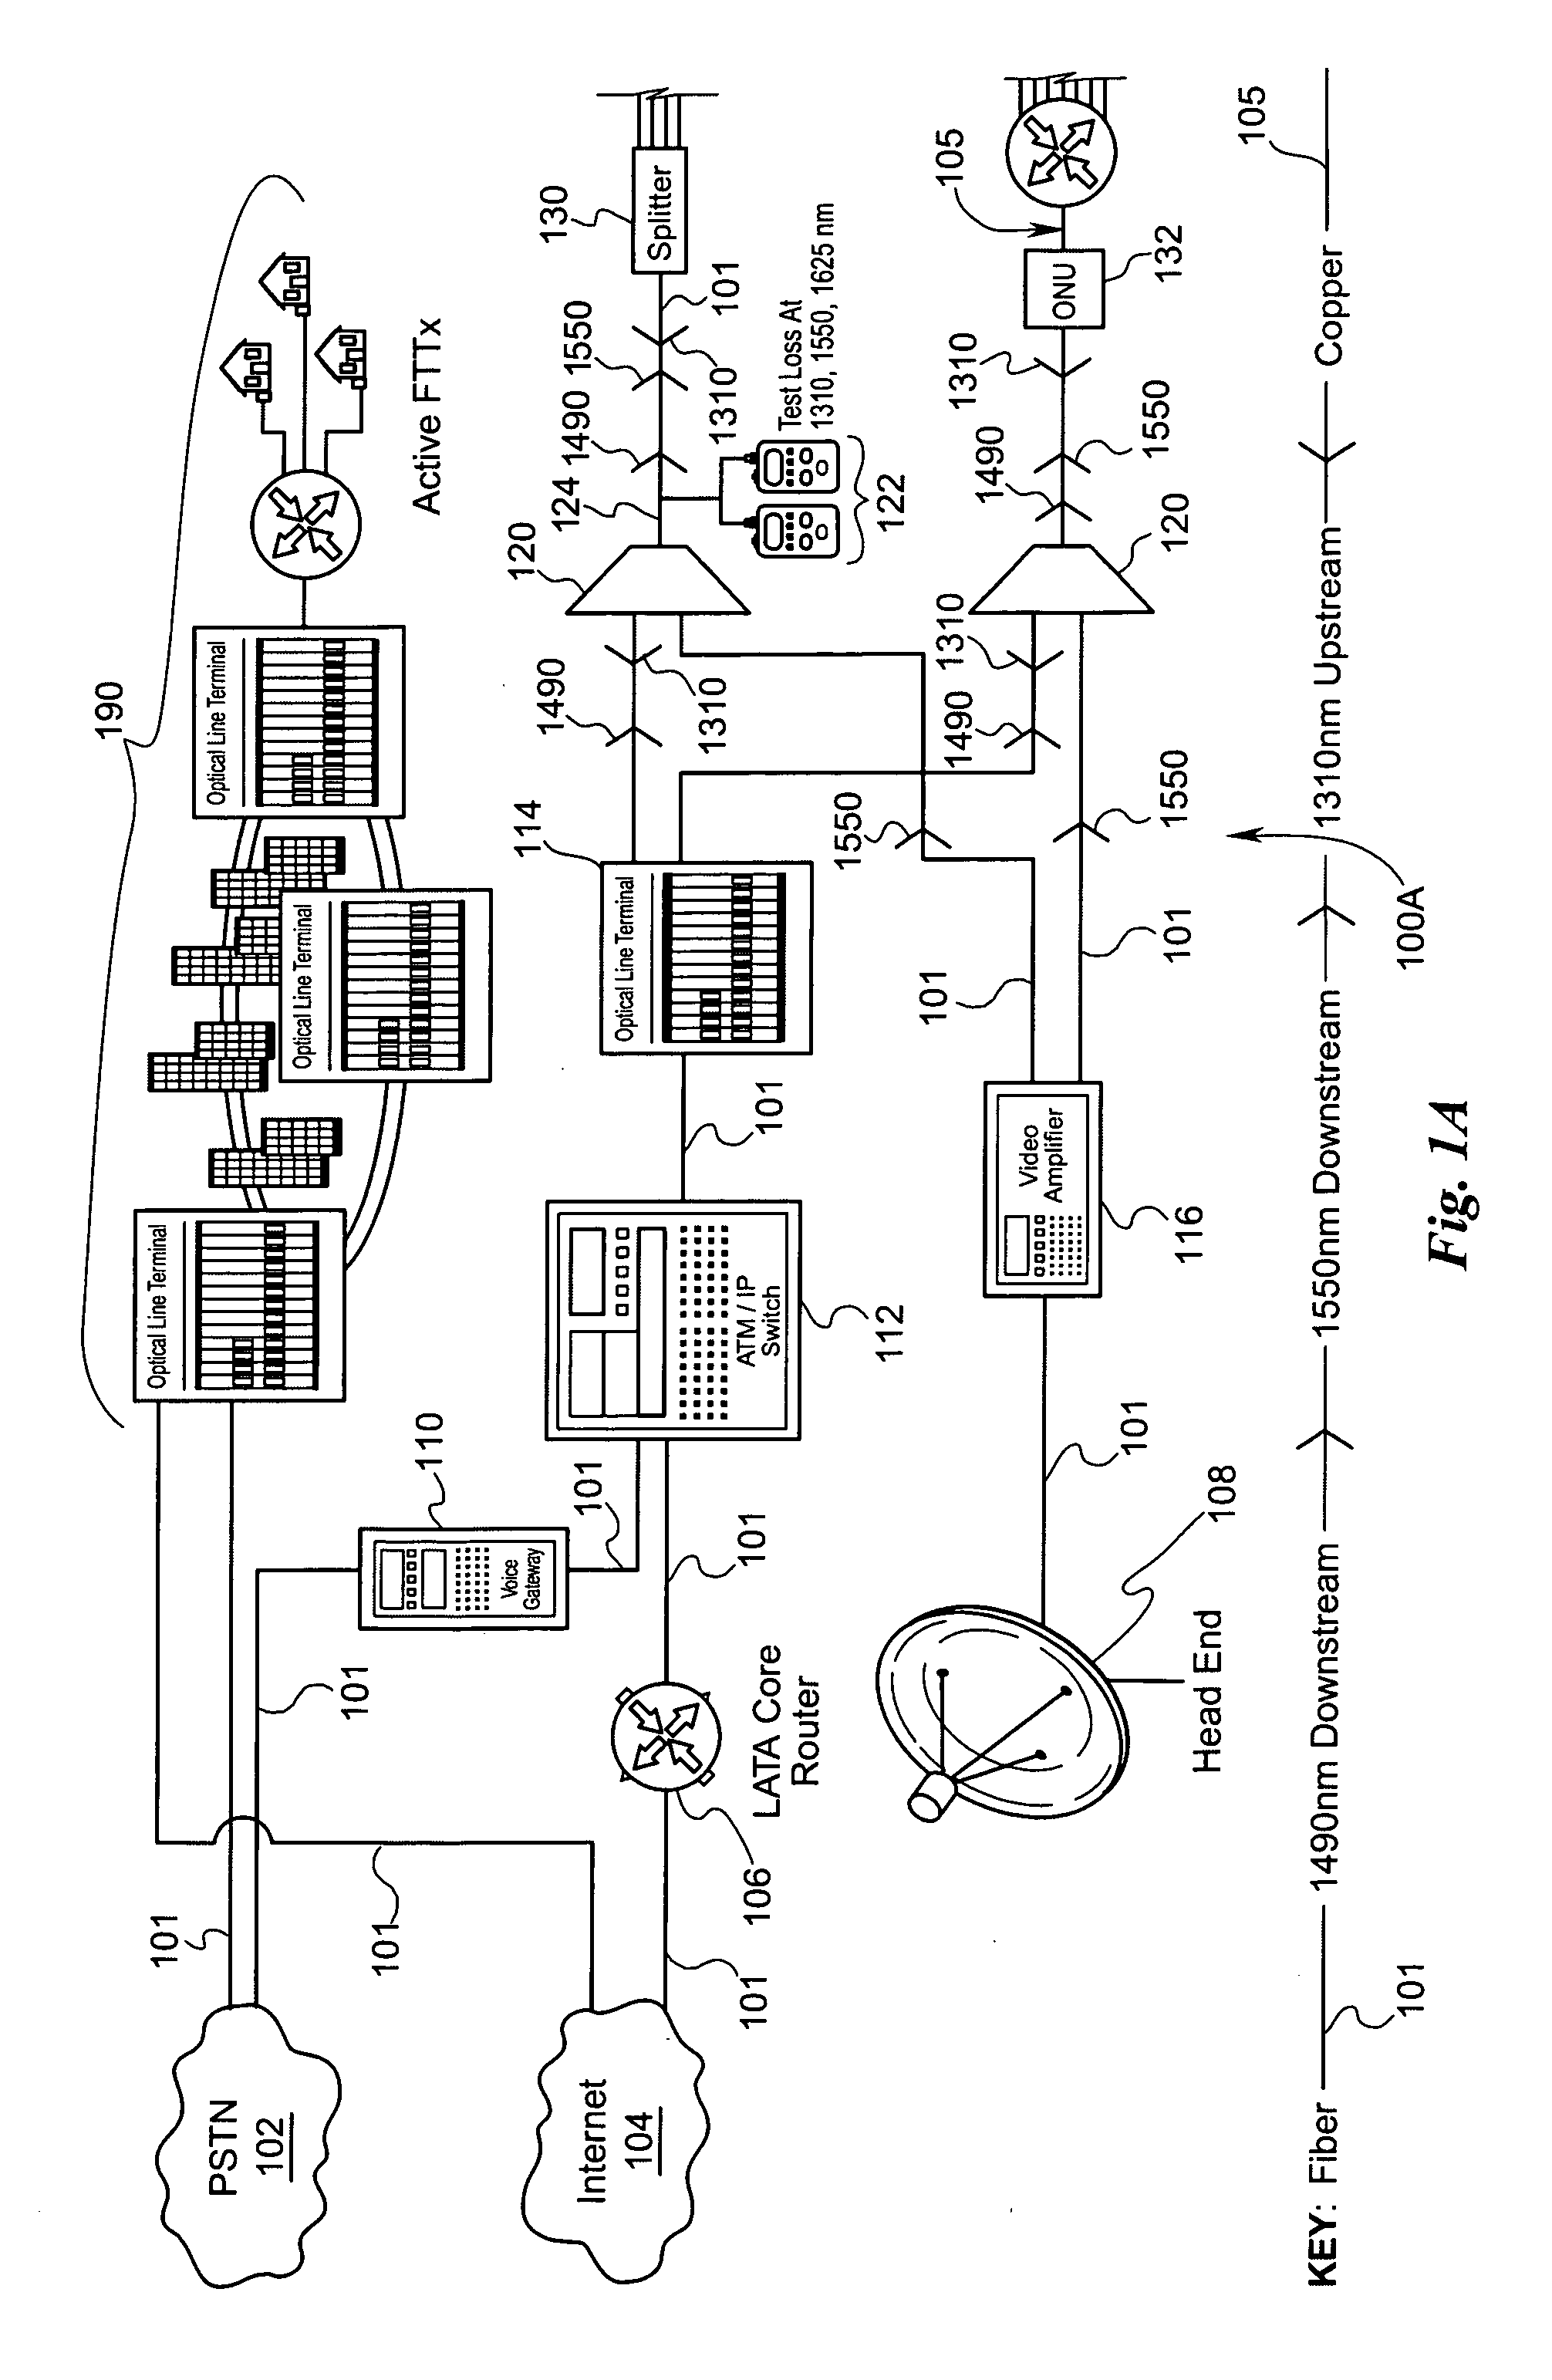 Passive optical network loss test apparatus and method of use thereof